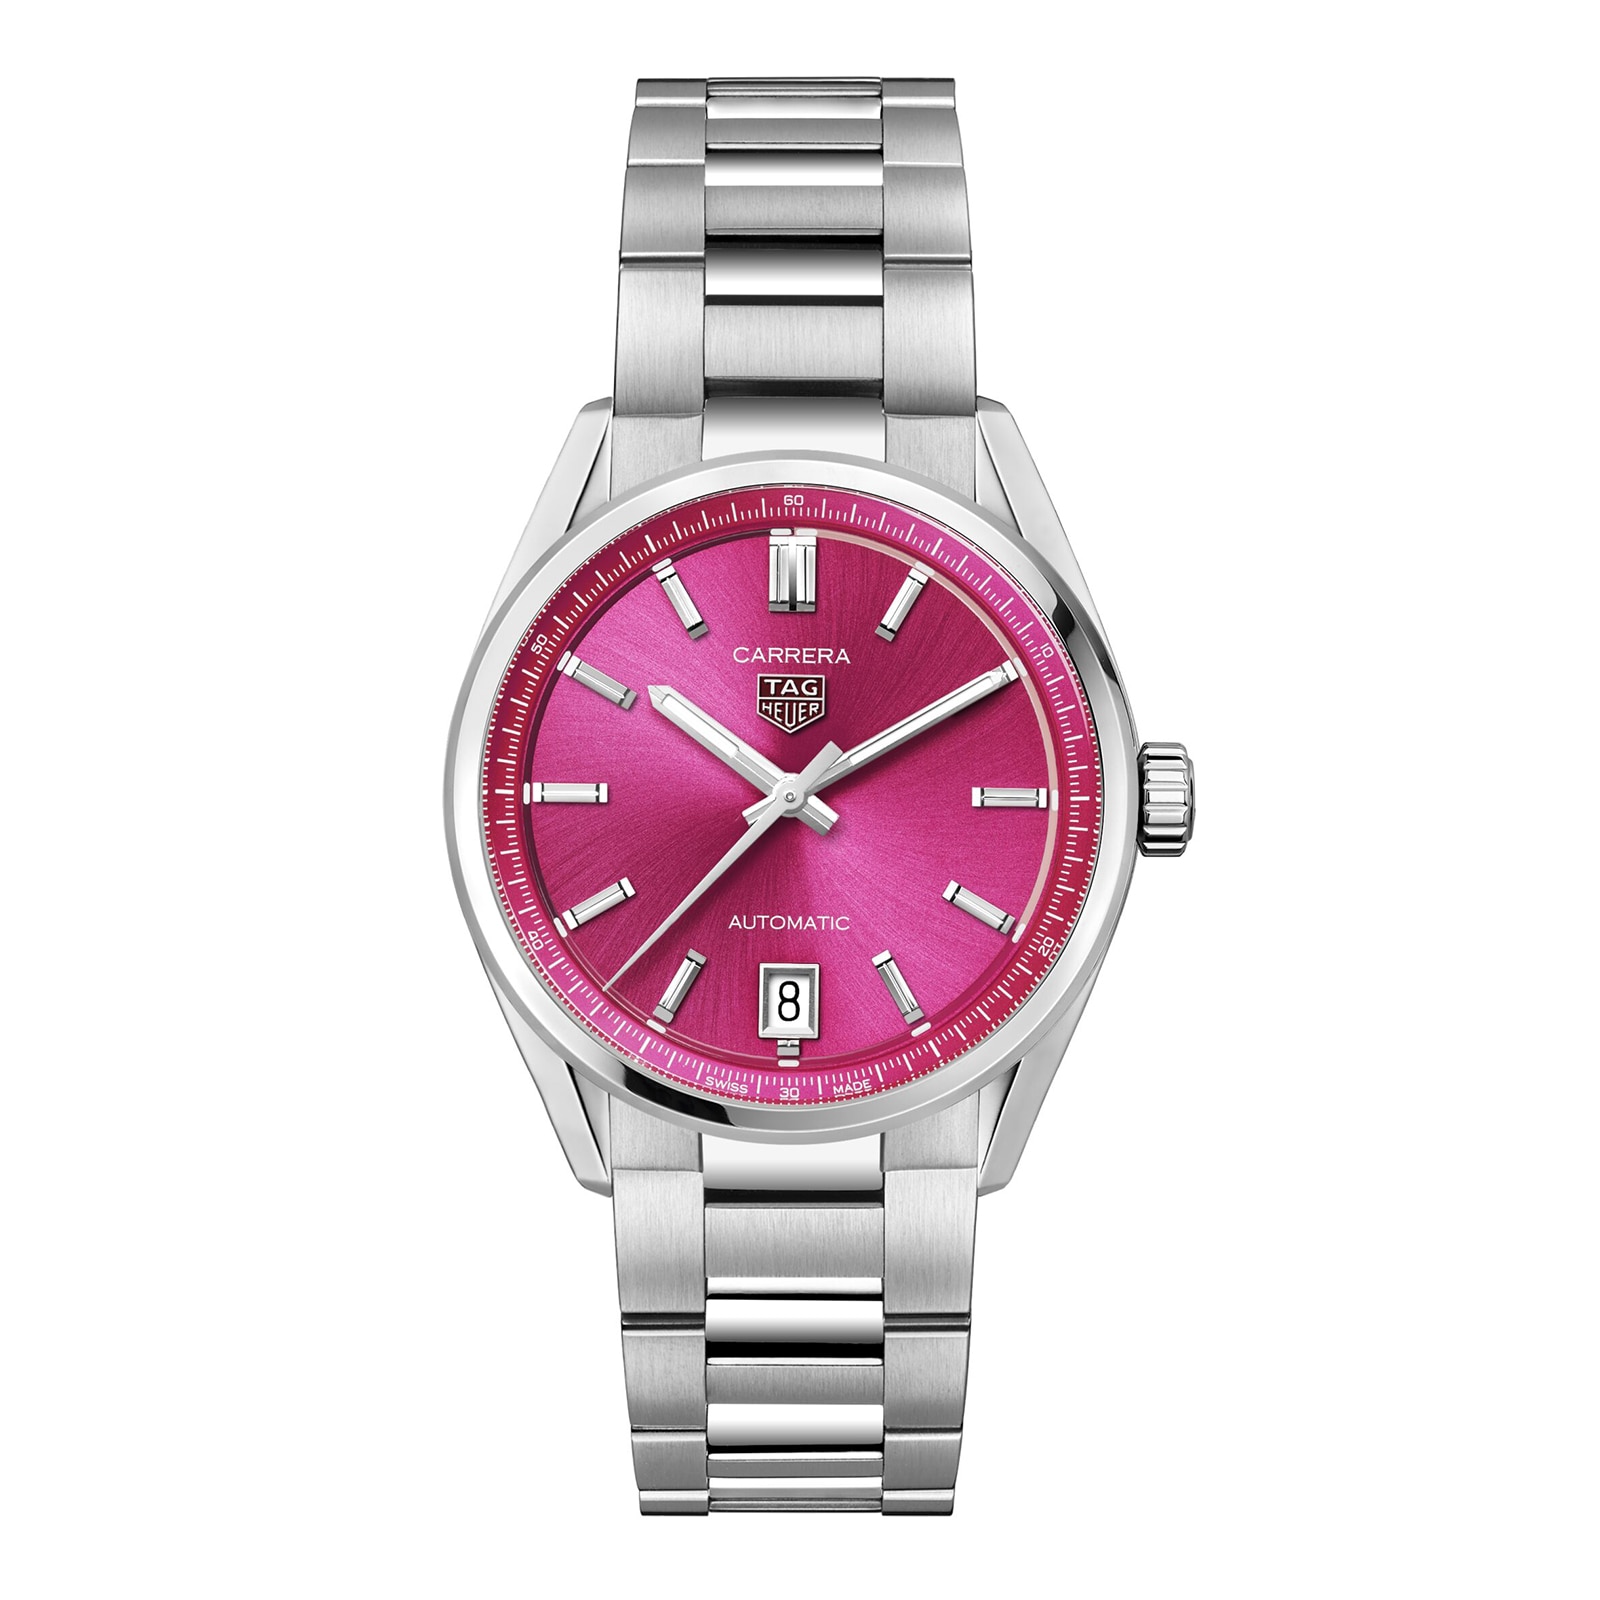 Fastrack Girls Trendy Upgrade: Pink Dial Watch with Contrast Accents